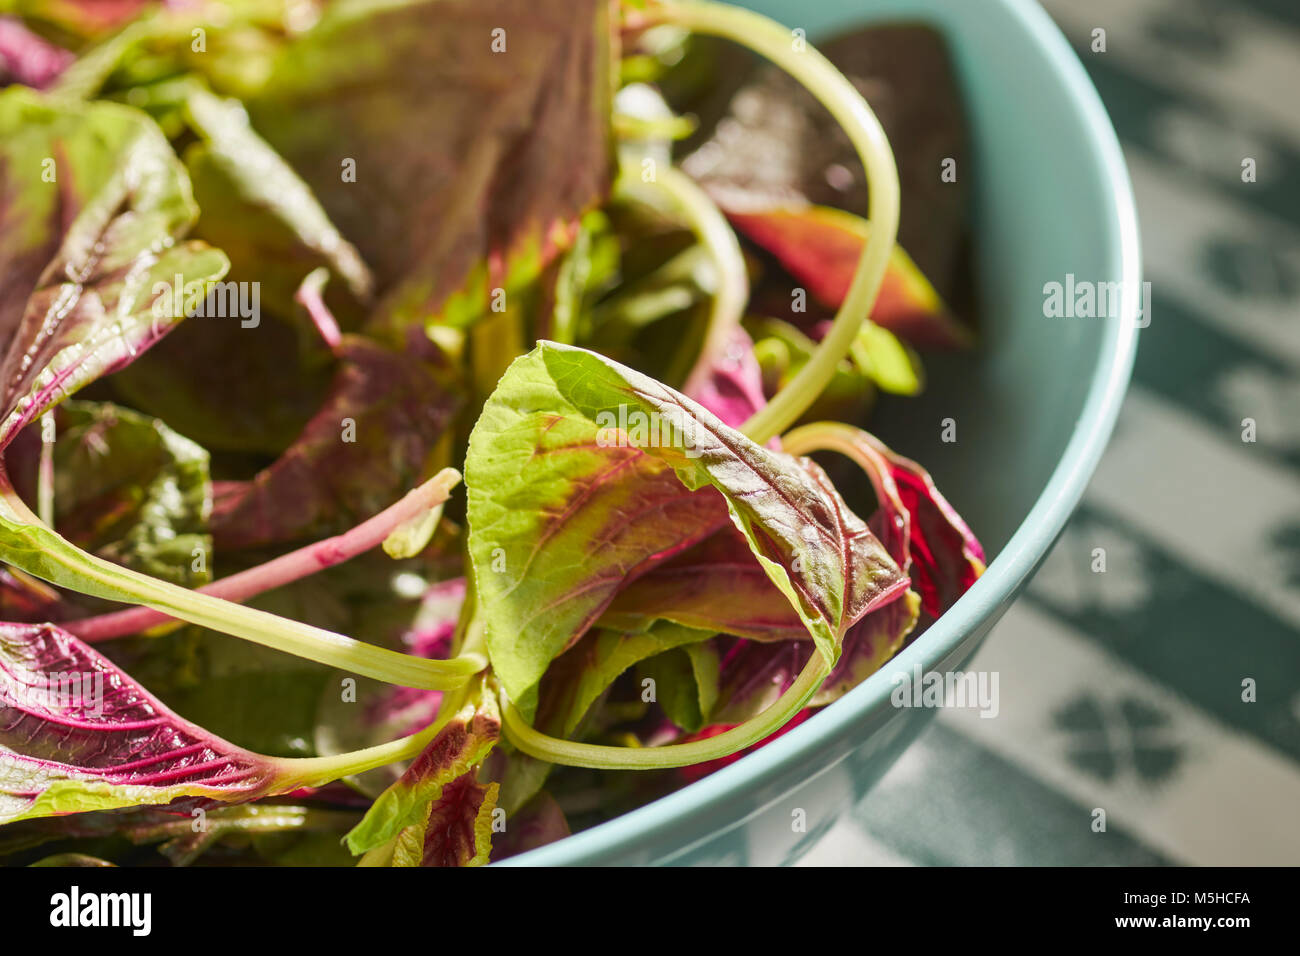 Red Amaranth, a type of spinach popular in Asian cuisines Stock Photo